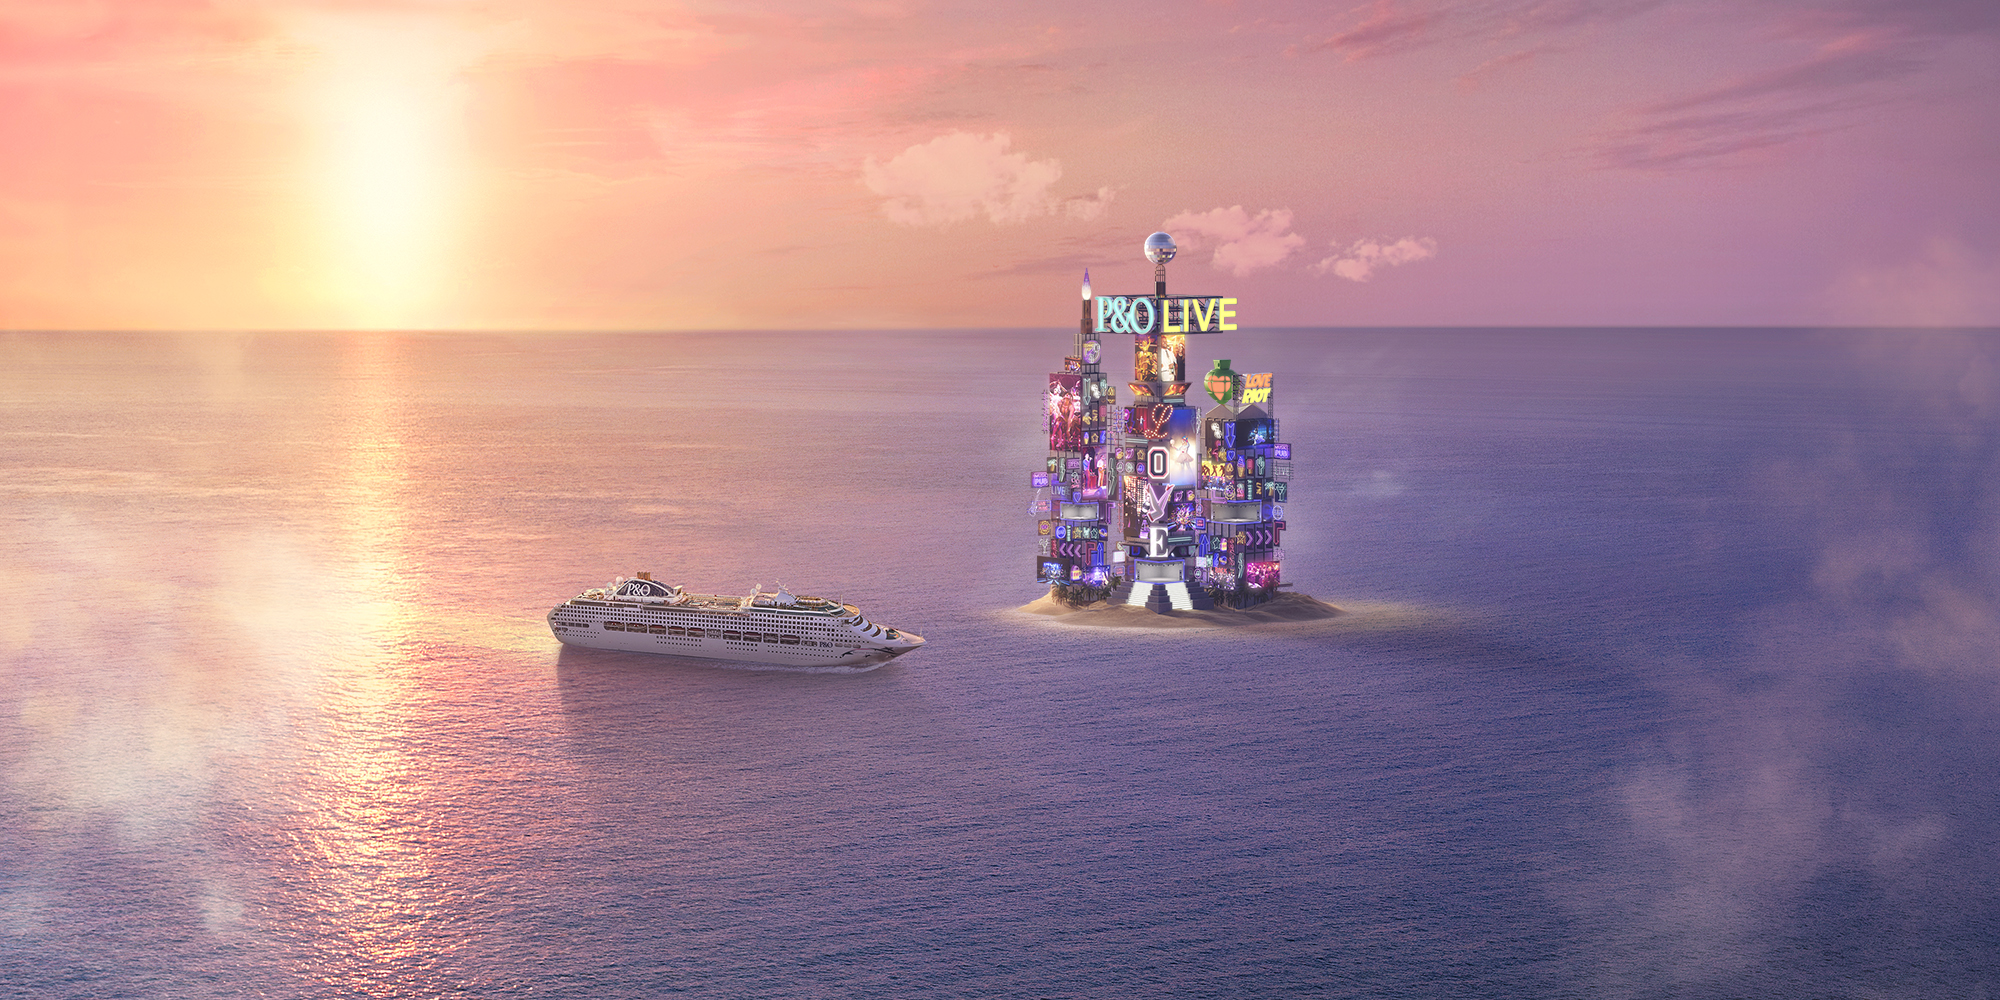 P&O Cruises Launches Latest ‘Like No Place on Earth’ Brand Campaign